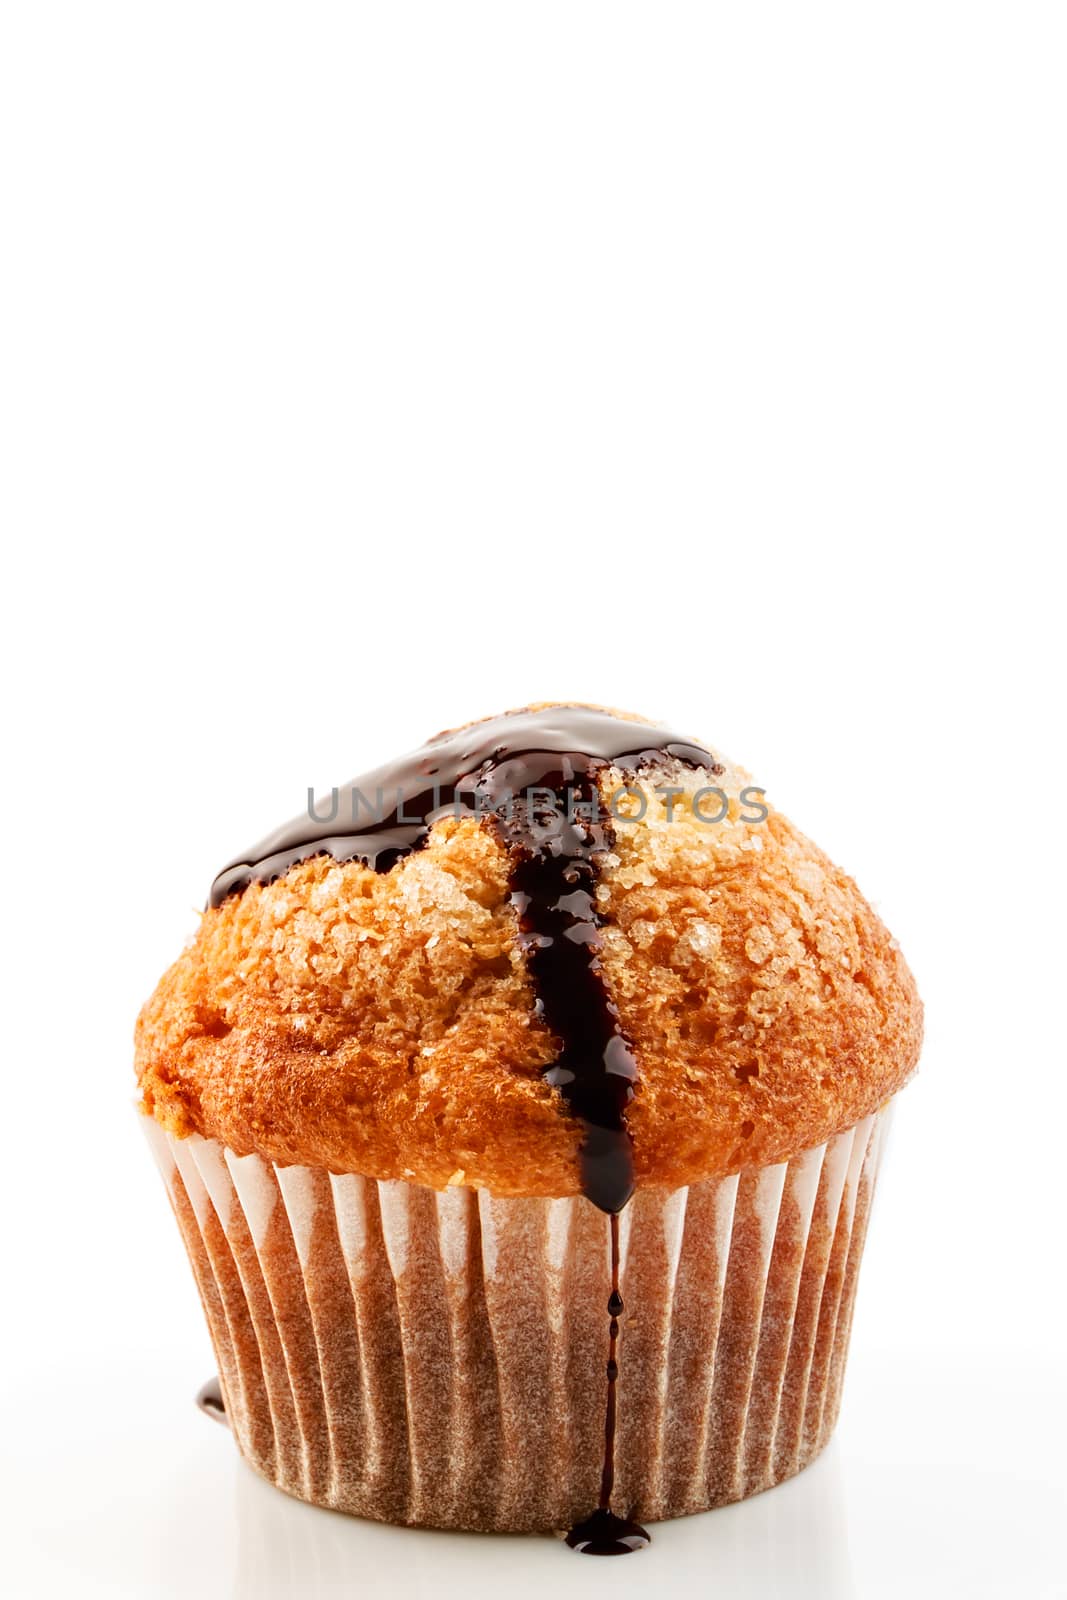 Homemade muffin with liquid chocolate on white background.Vertical image